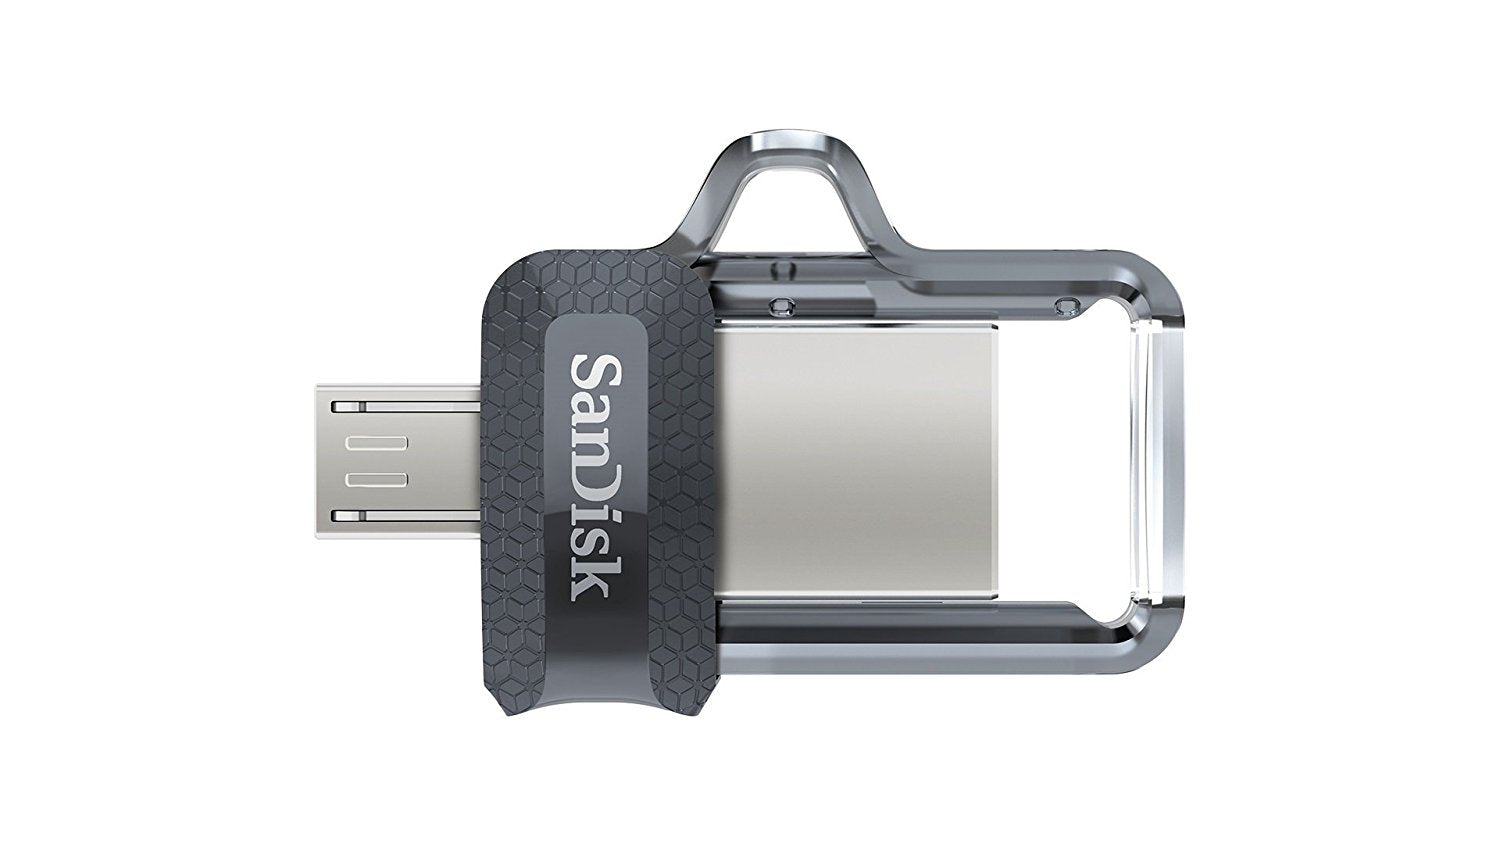 SanDisk Ultra 16GB Drive m3.0 USB Flash Drive with 130mb/s** Read JG Superstore